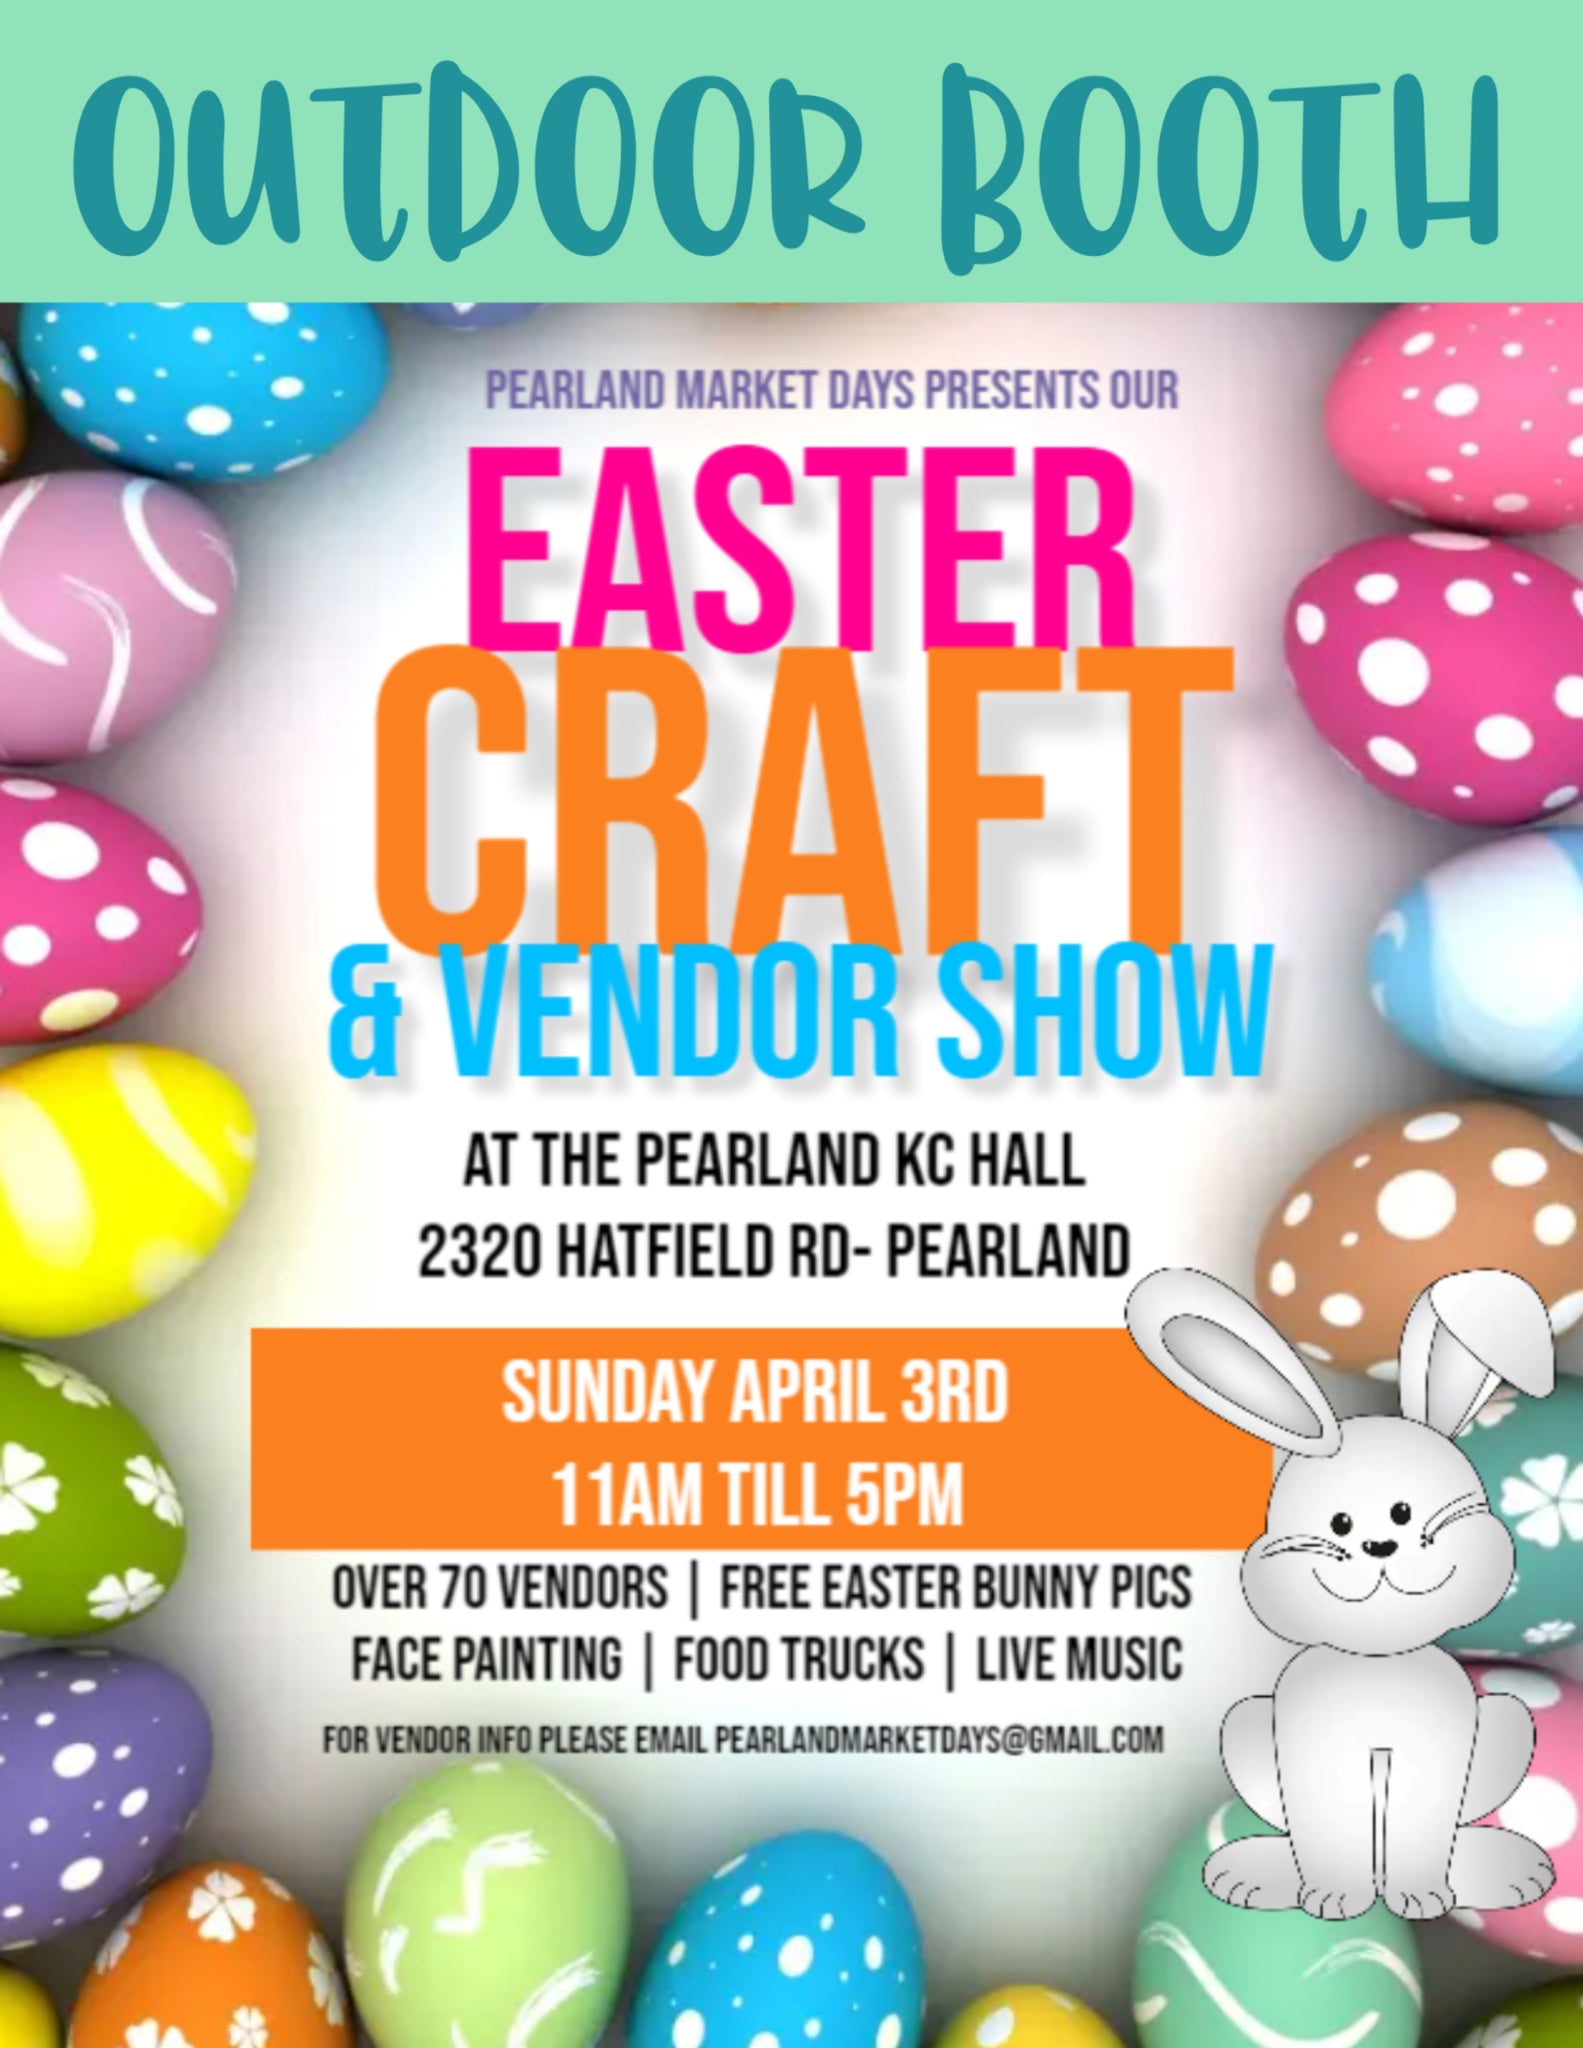 PEARLAND Sunday April 3, 2022 - OUTDOOR BOOTH